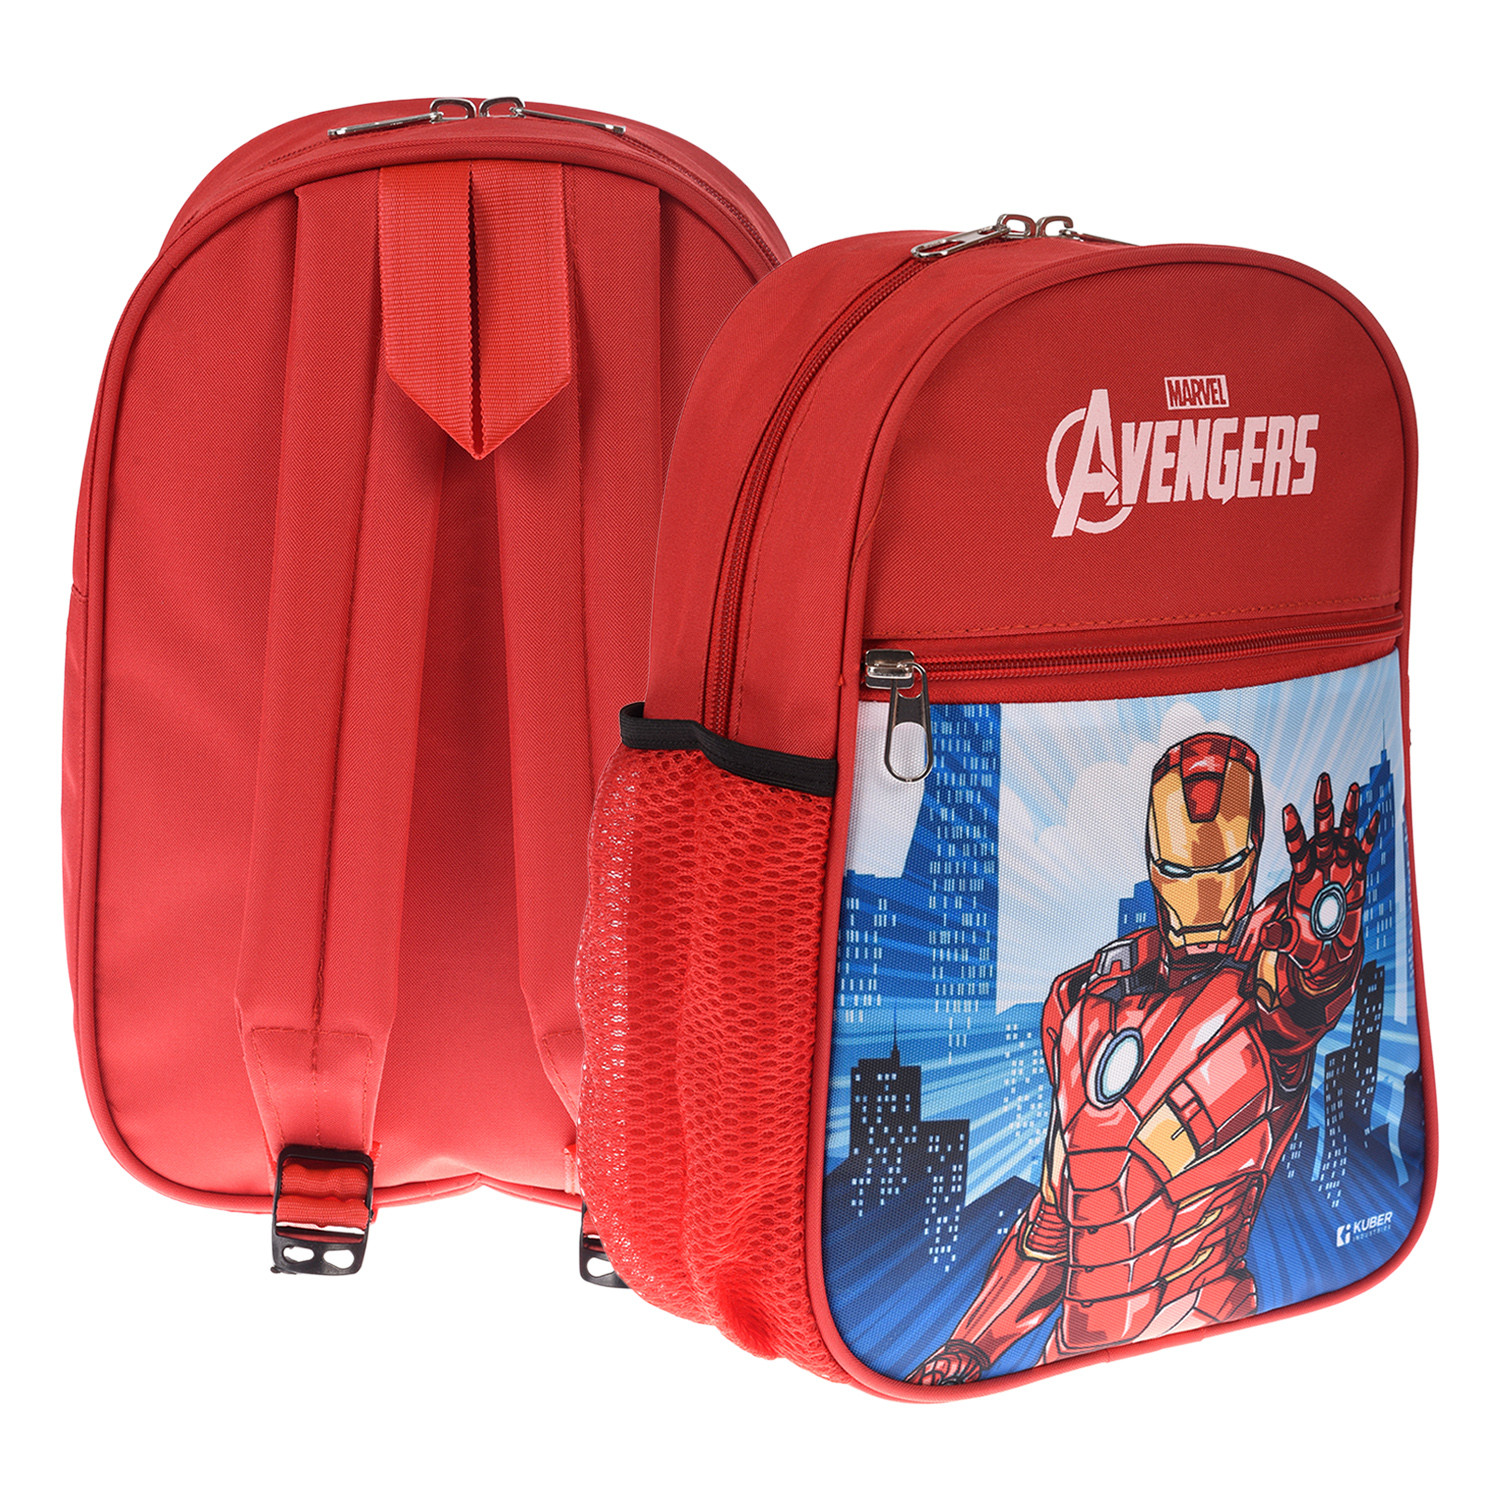 Kuber Industries Marvel Iron-Man School Bag|2 Compartment Rexine School Bagpack|School Bag for Kids|School Bags for Girls with Zipper Closure|Small Size (Red)